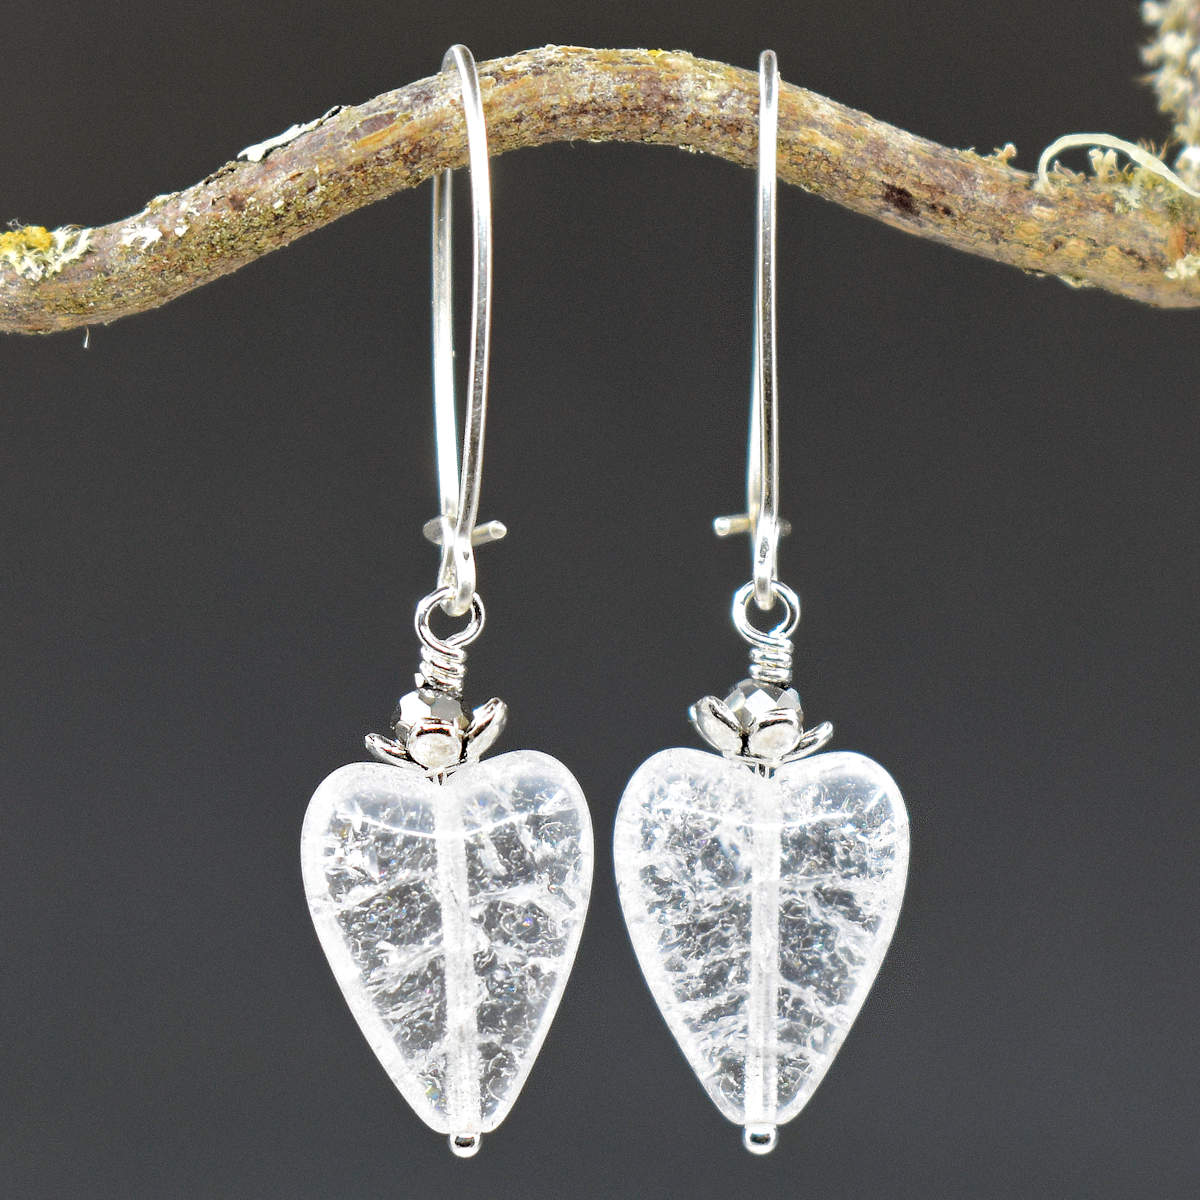 A pair of earrings hang from a twisty branch against a gray background. The earrings have long silver oval wires that latch and dangles made from shiny crackled glass hearts with sparkly silver accents on the top.